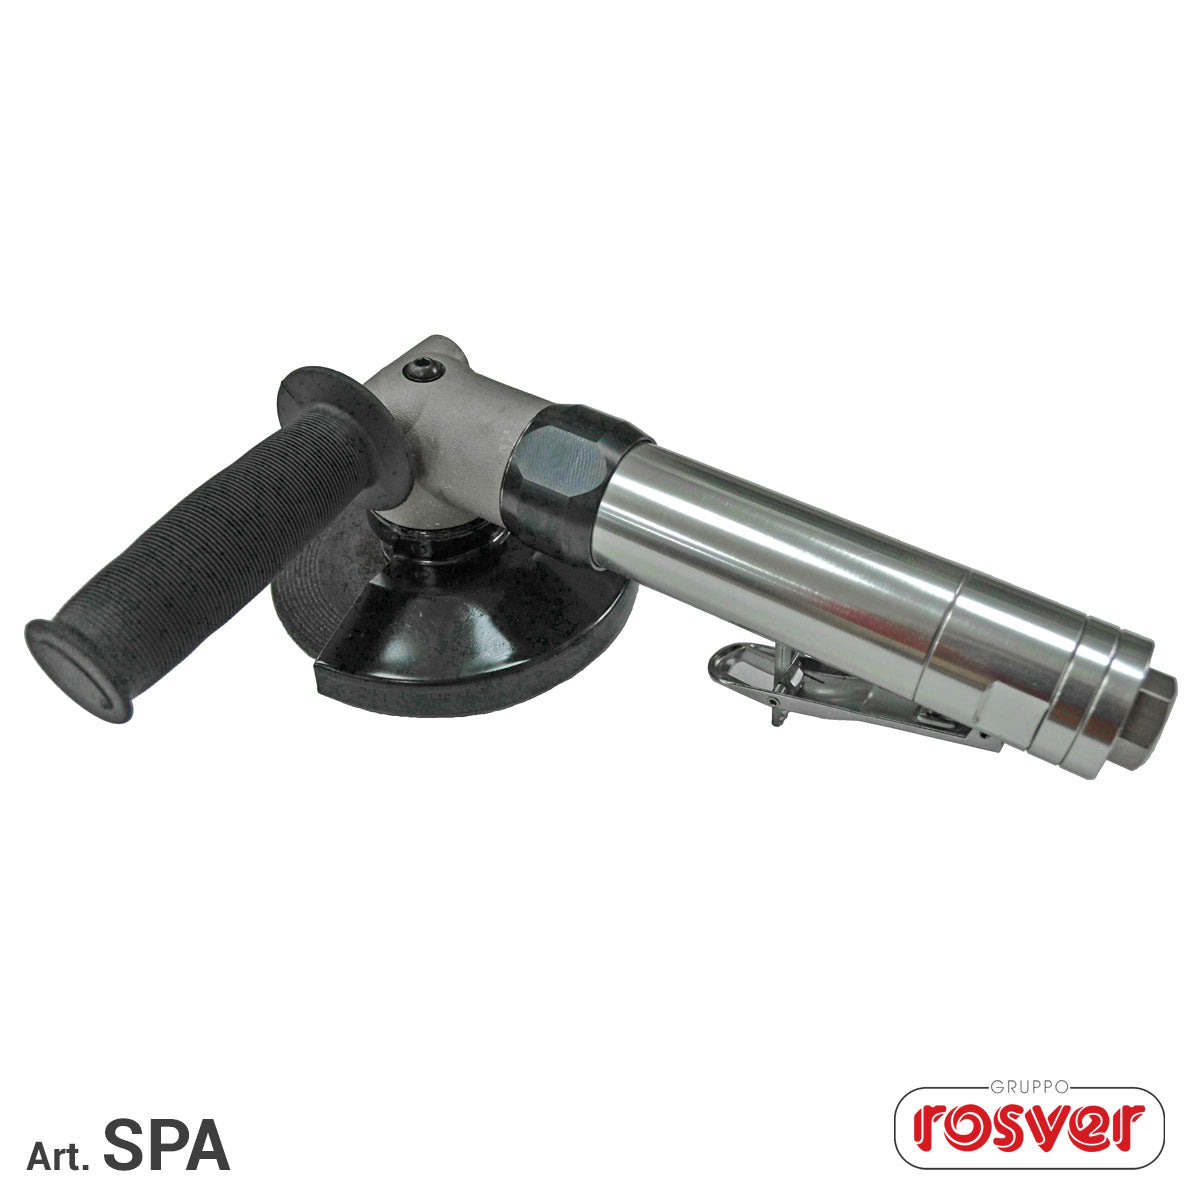 Air Angle Grinder SPA 115-125 1HP 12.000 rpm - Rosver - Conf.1pz